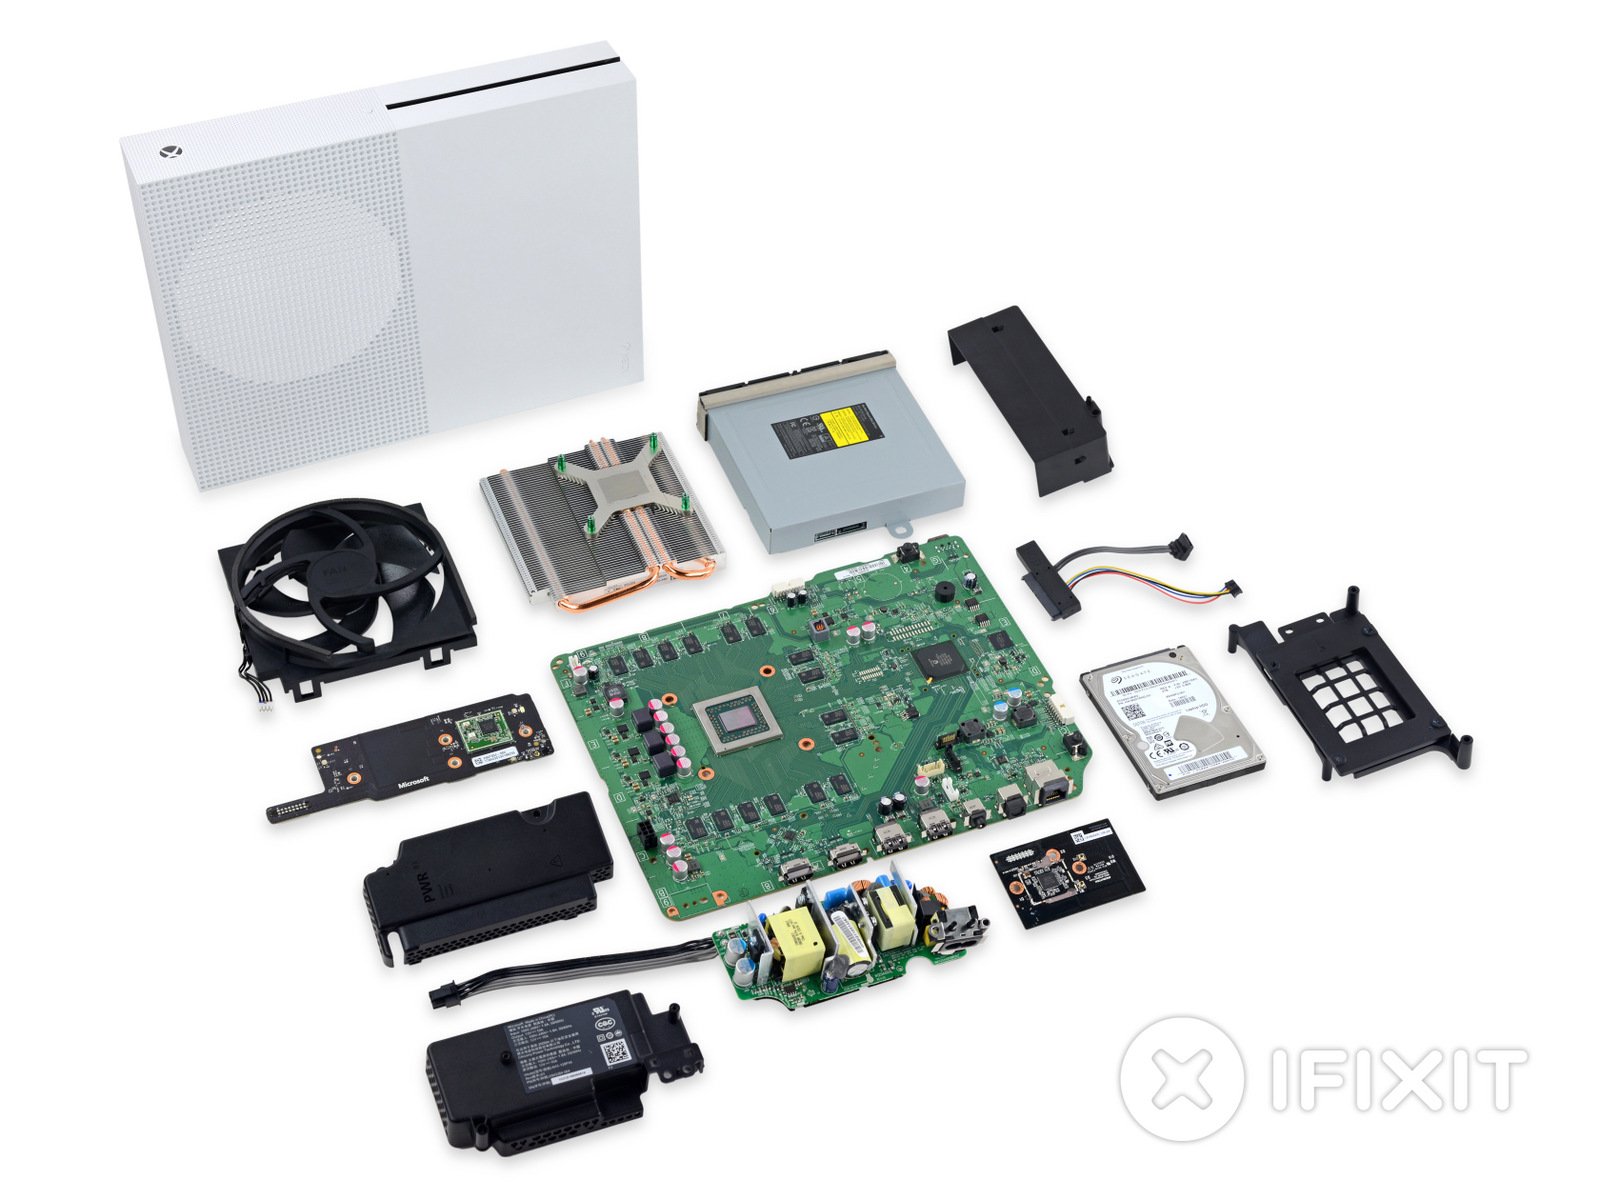 Microsoft Xbox One S receives repairability score of 8 out of 10 from iFixit